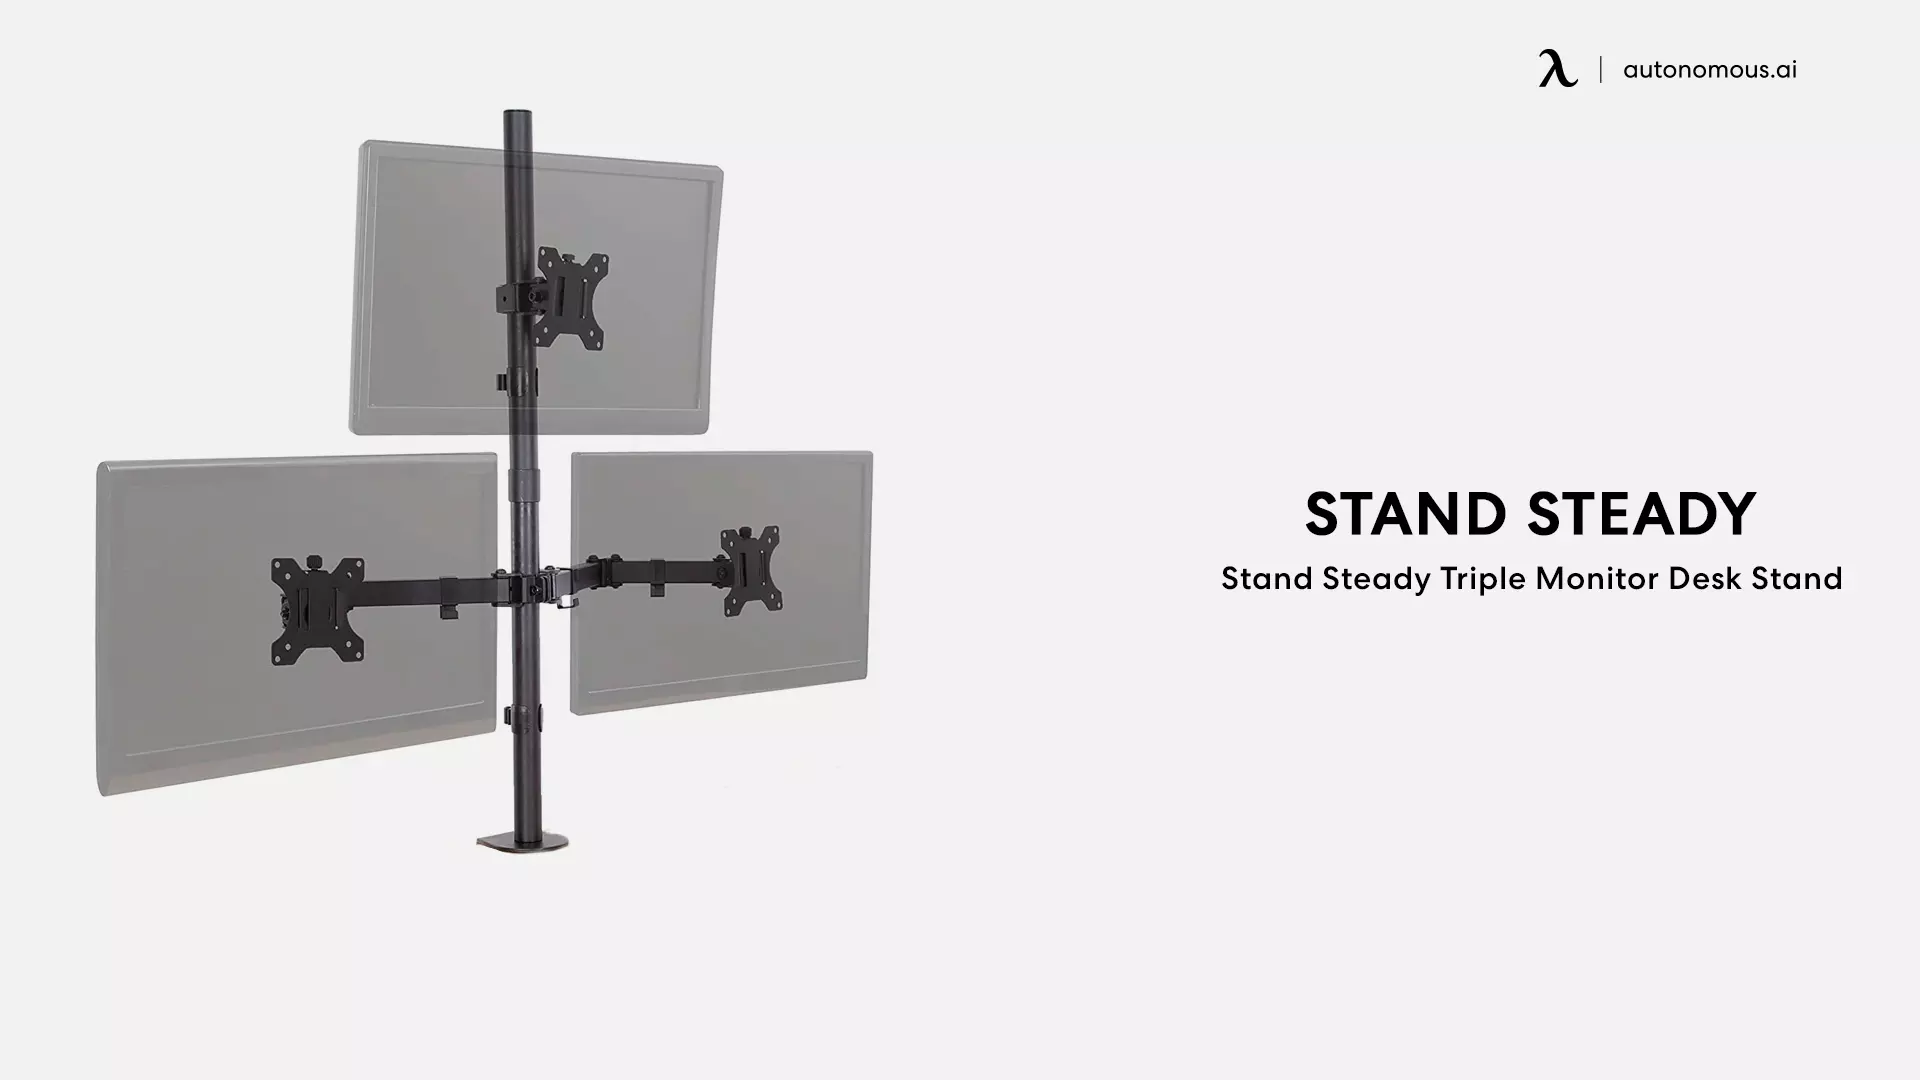 Stand Steady Triple Monitor Desk Stand